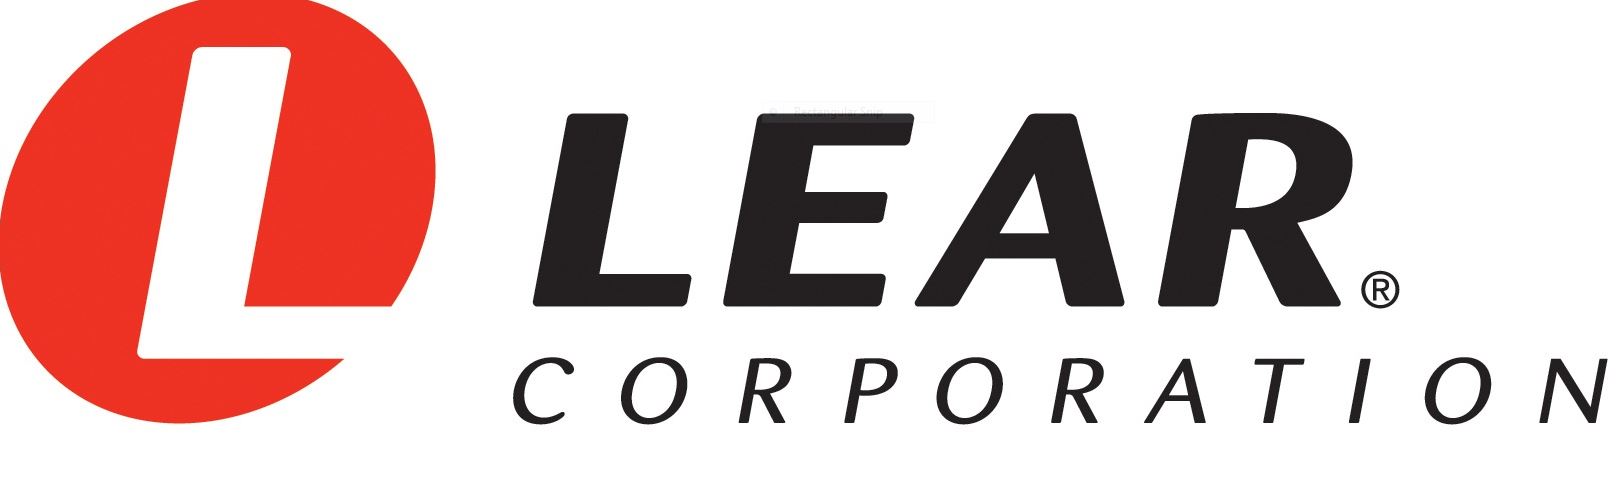 learcorporation1a01.jpg